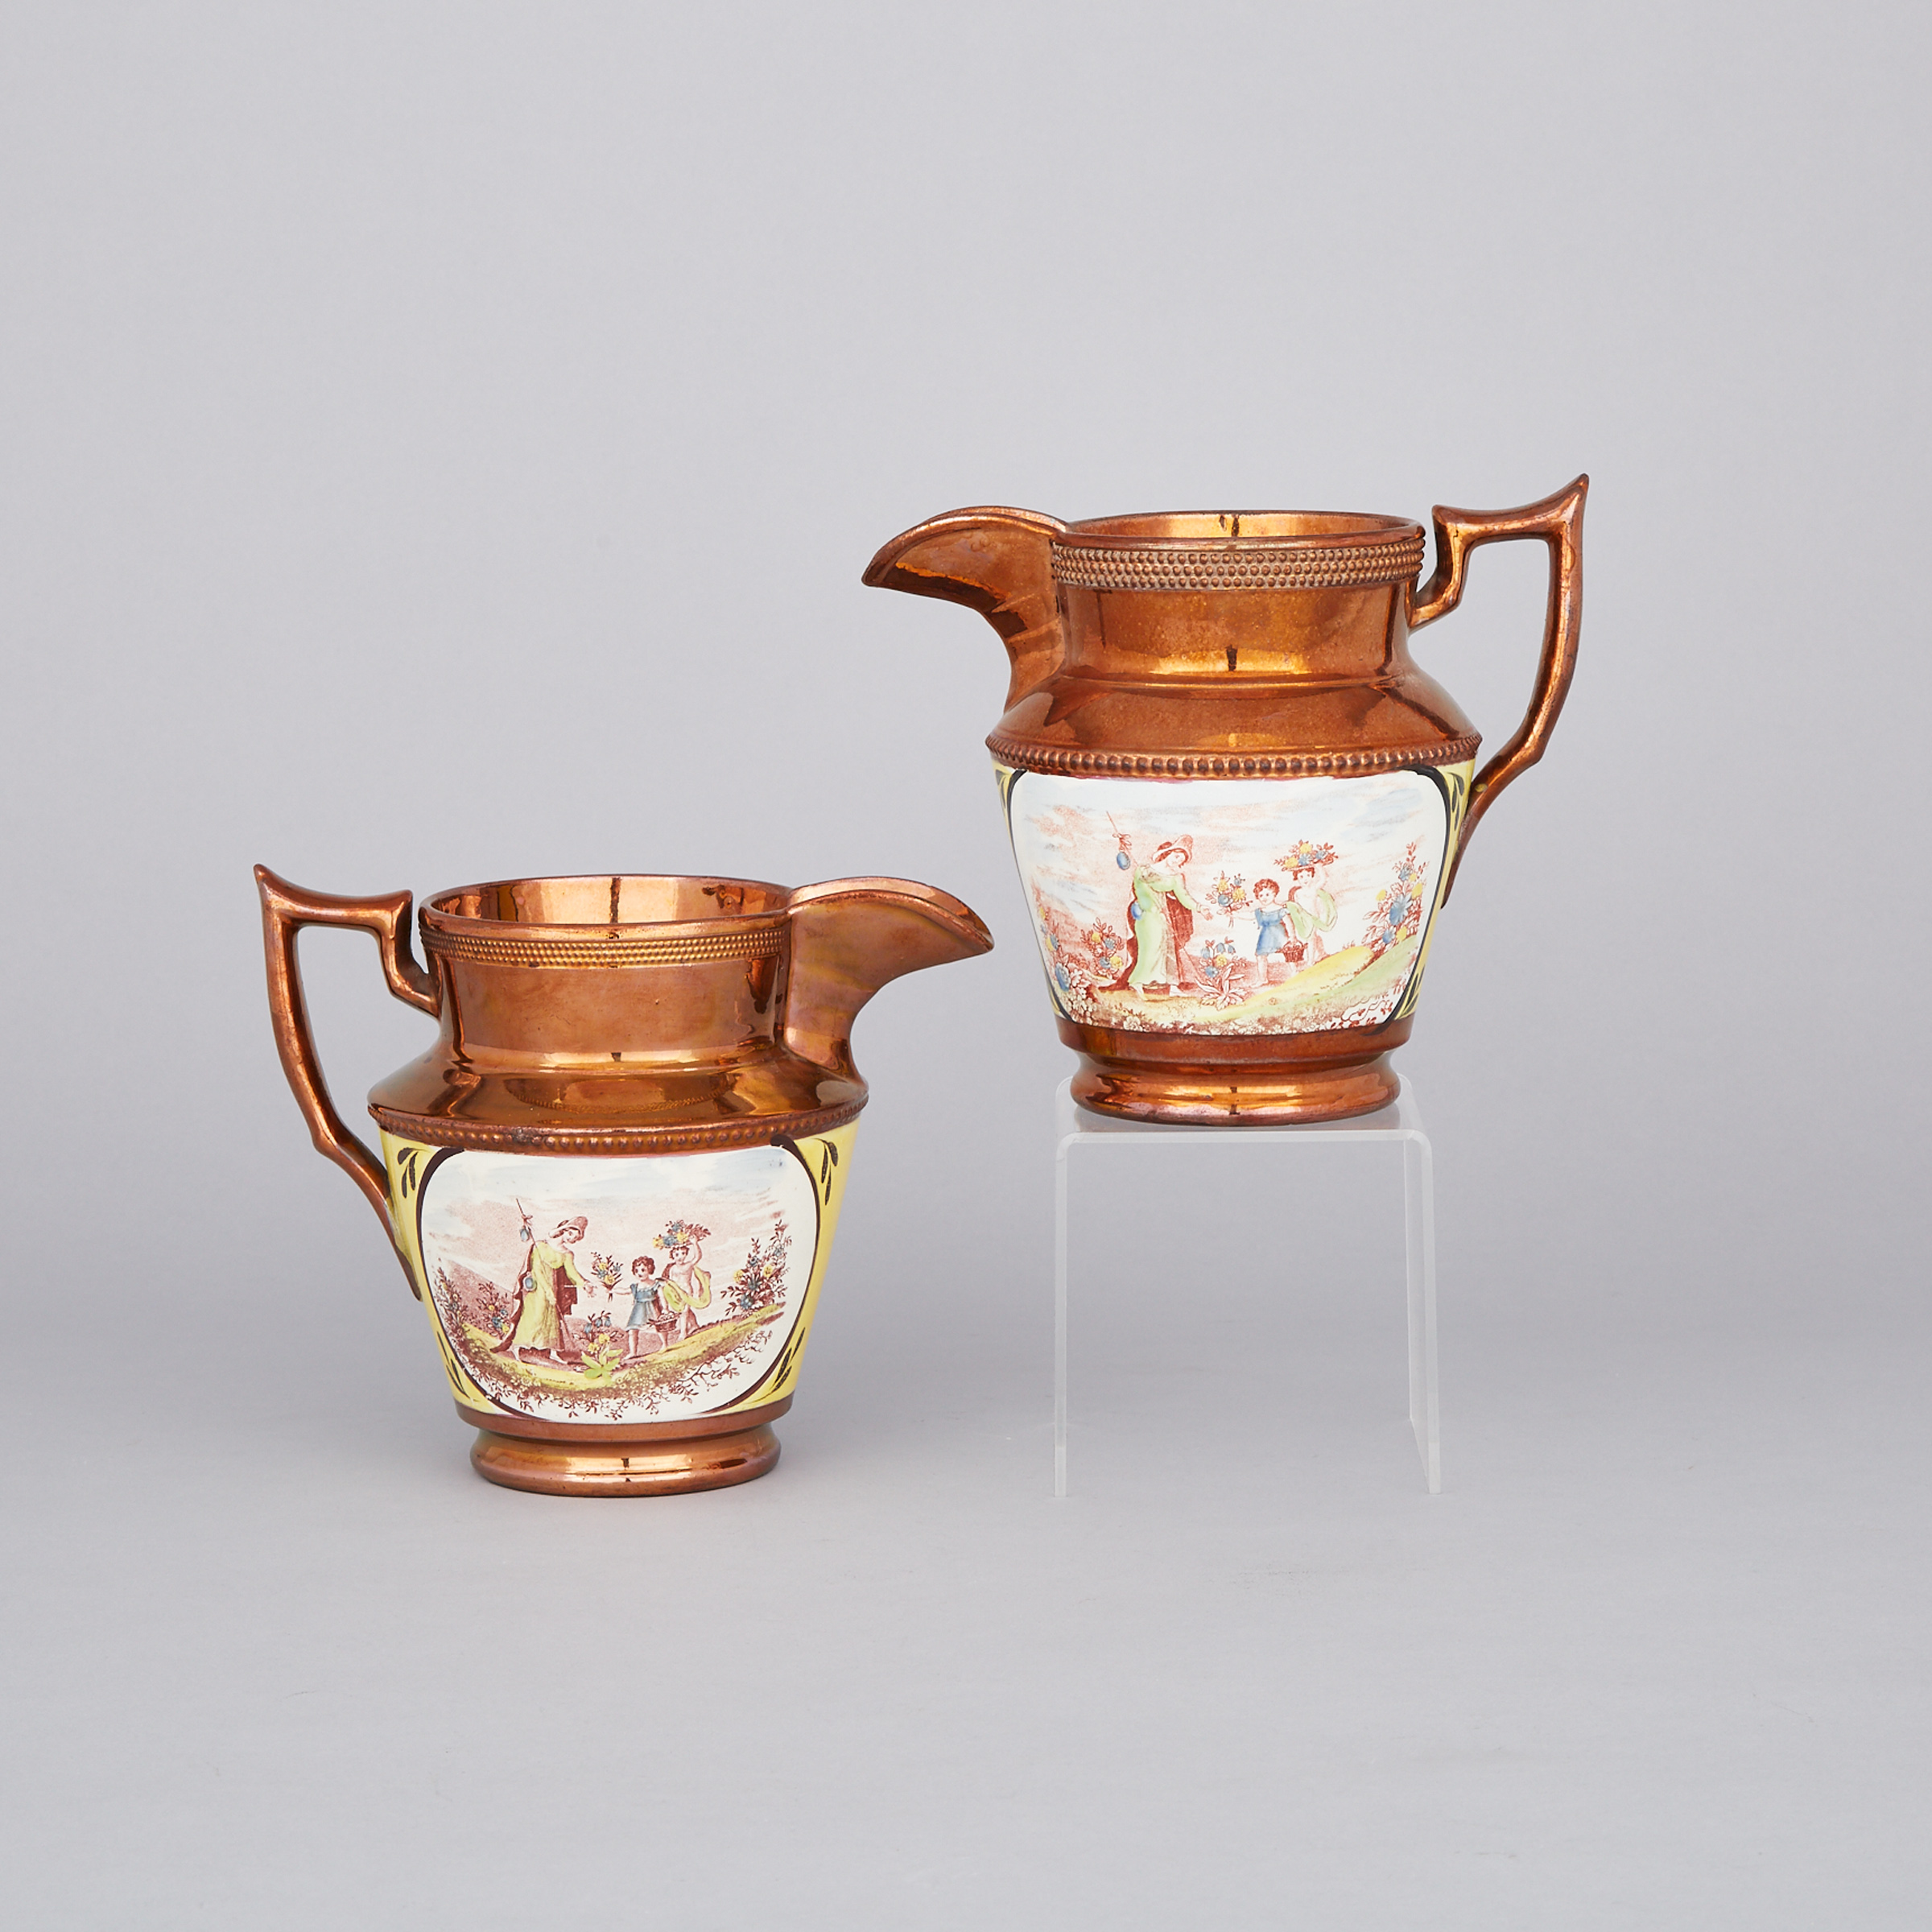 Pair of English Yellow Banded and Printed Copper Lustre Jugs, c.1830